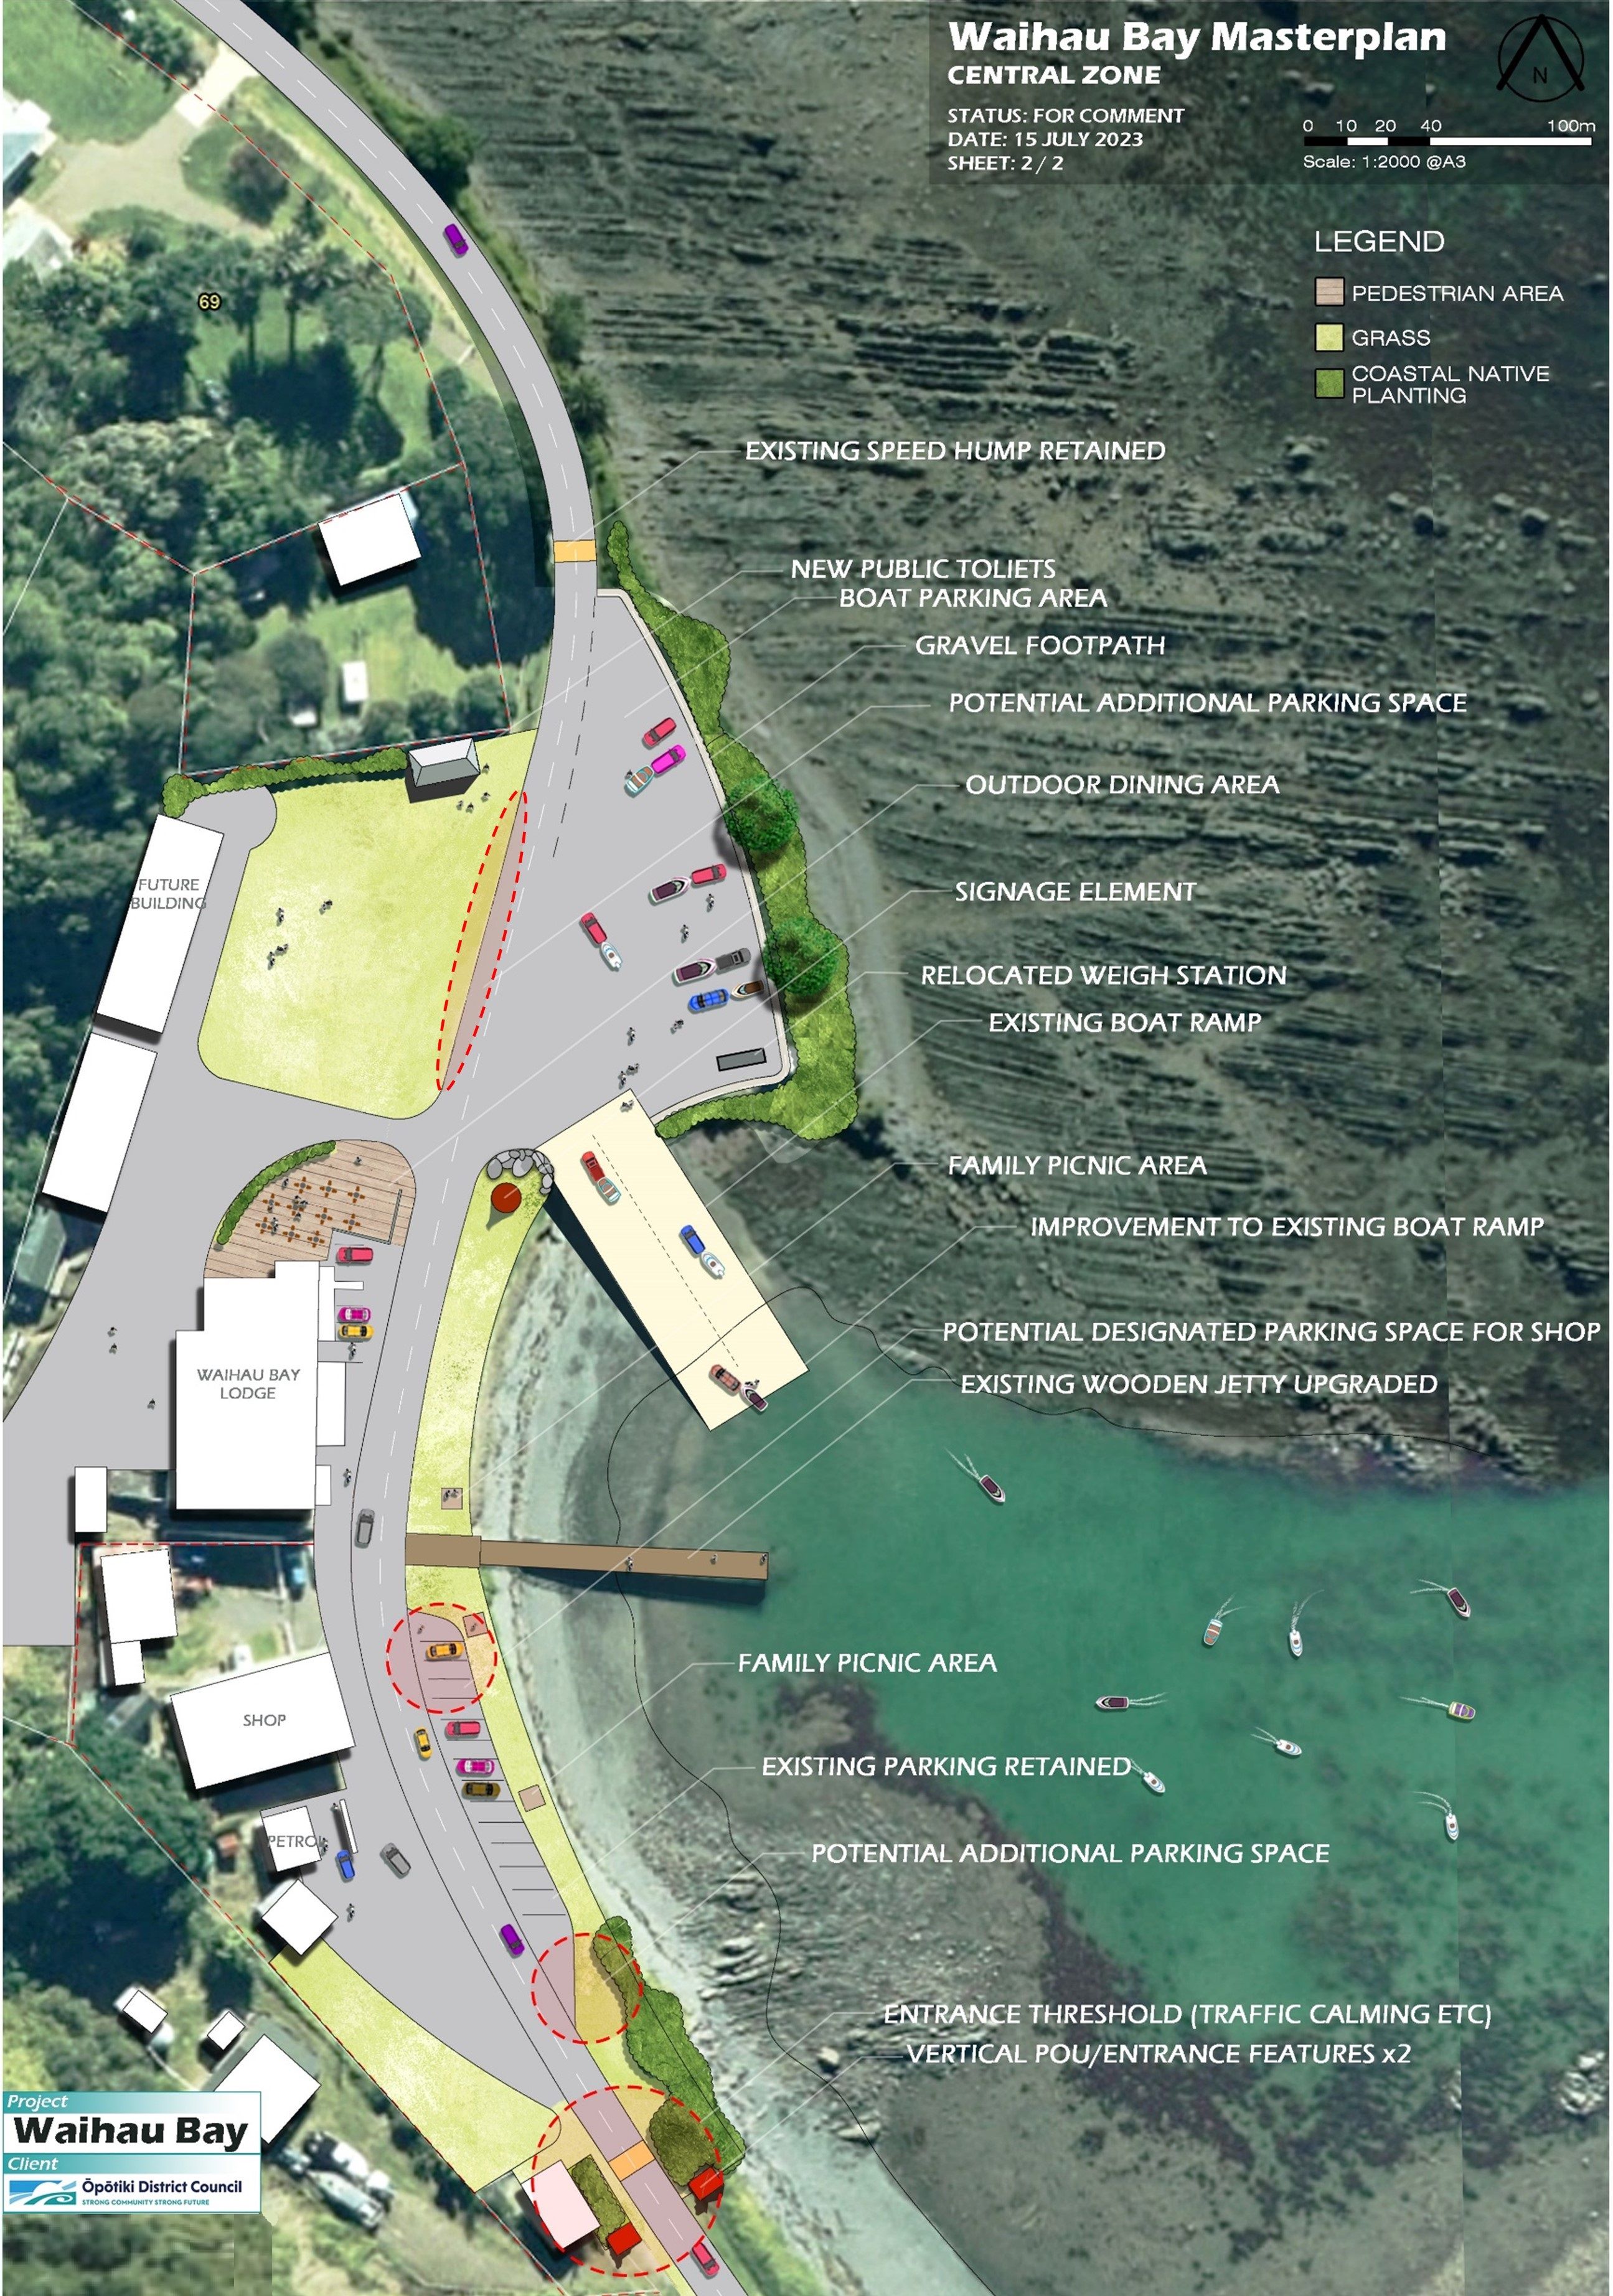 Aerial view of Waihau Bay boat ramp area with text and illustrations overlay showing suggested locations of key community facilities.   